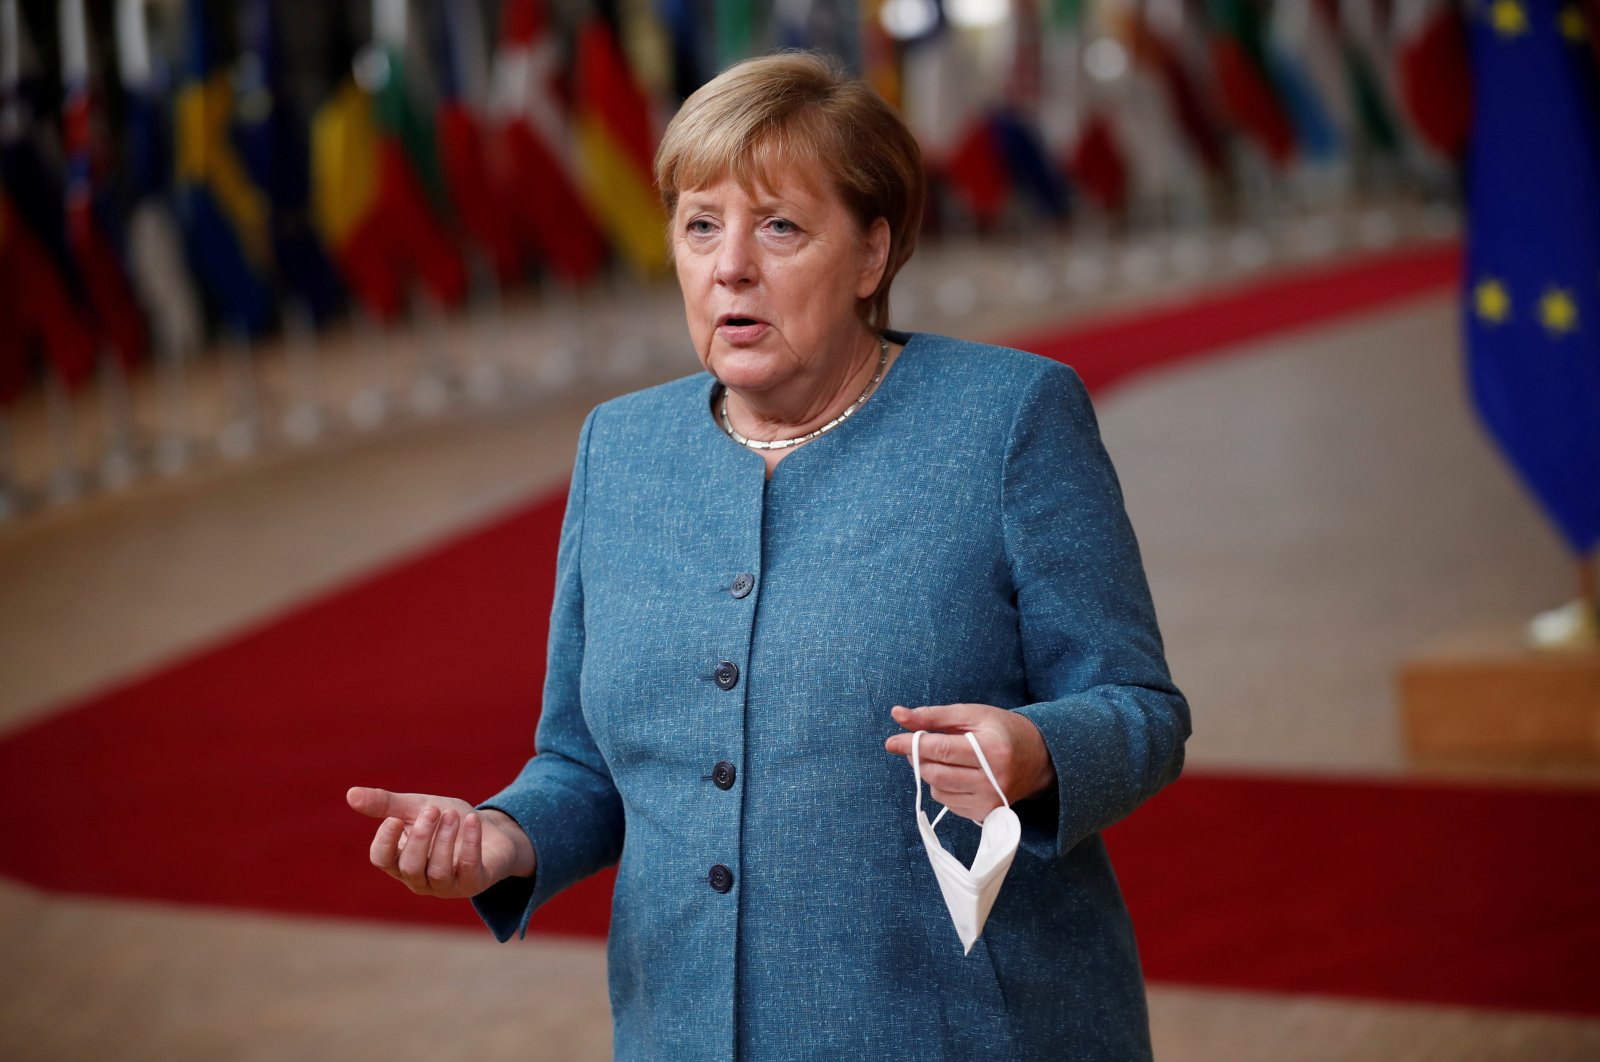 German Chancellor Angela Merkel speaks to the media as she arrives for the second face-to-face European Union summit since the COVID-19 outbreak, in Brussels, Belgium, Oct. 1, 2020. (Reuters Photo)